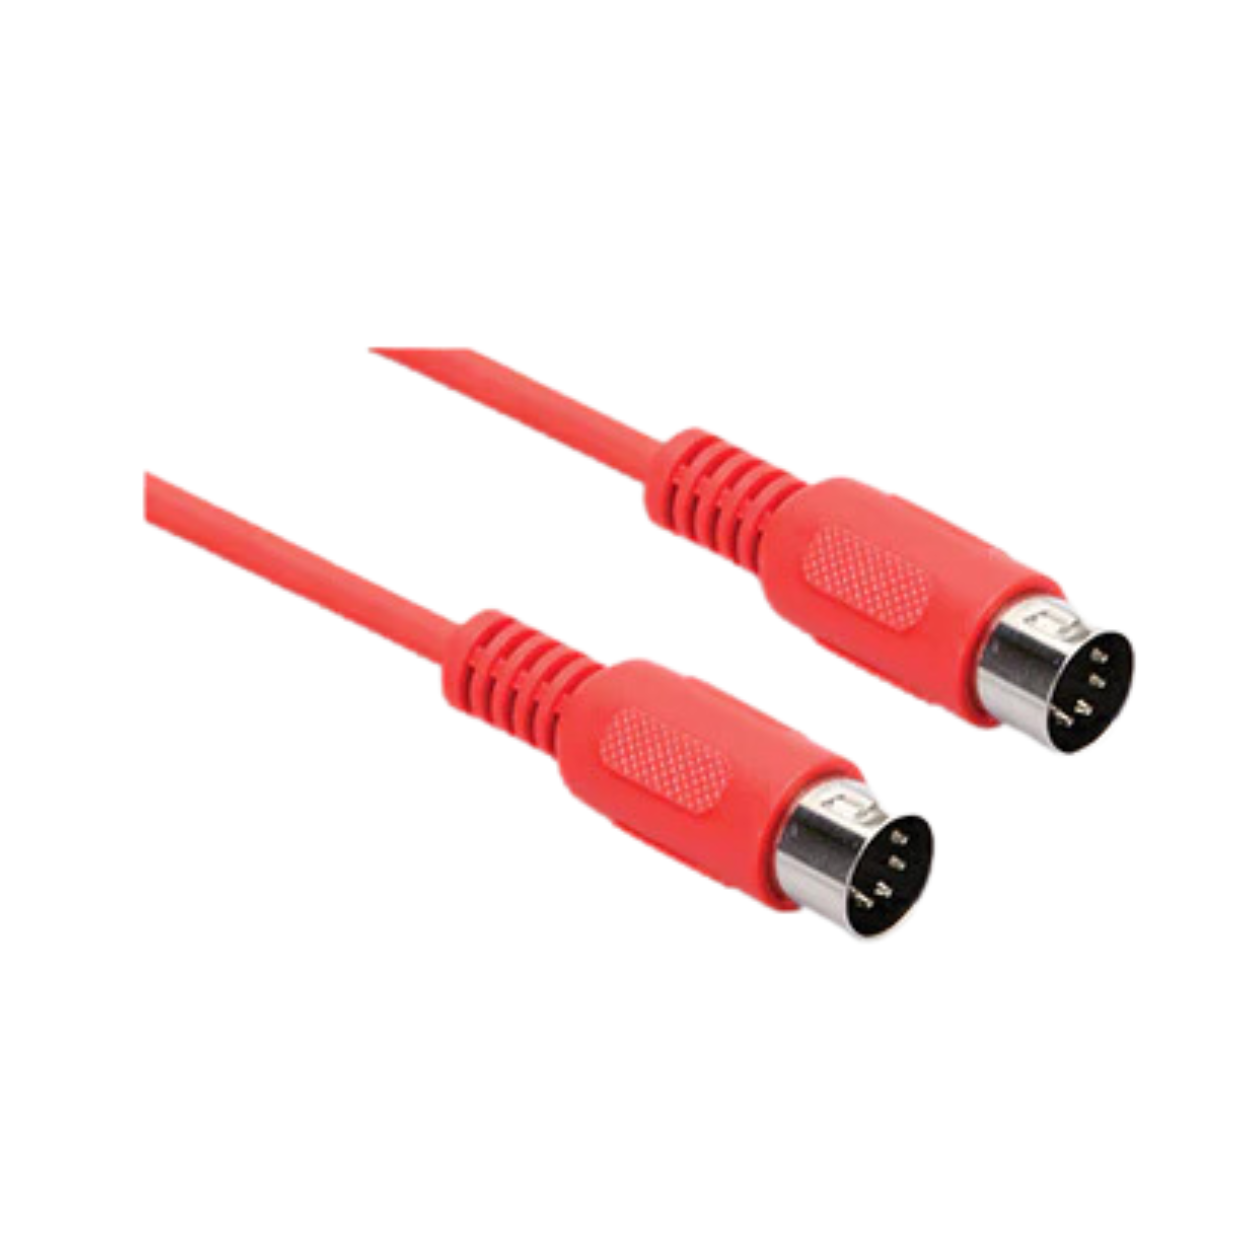 Hosa MID-310RD MIDI Cable, Red, 10ft